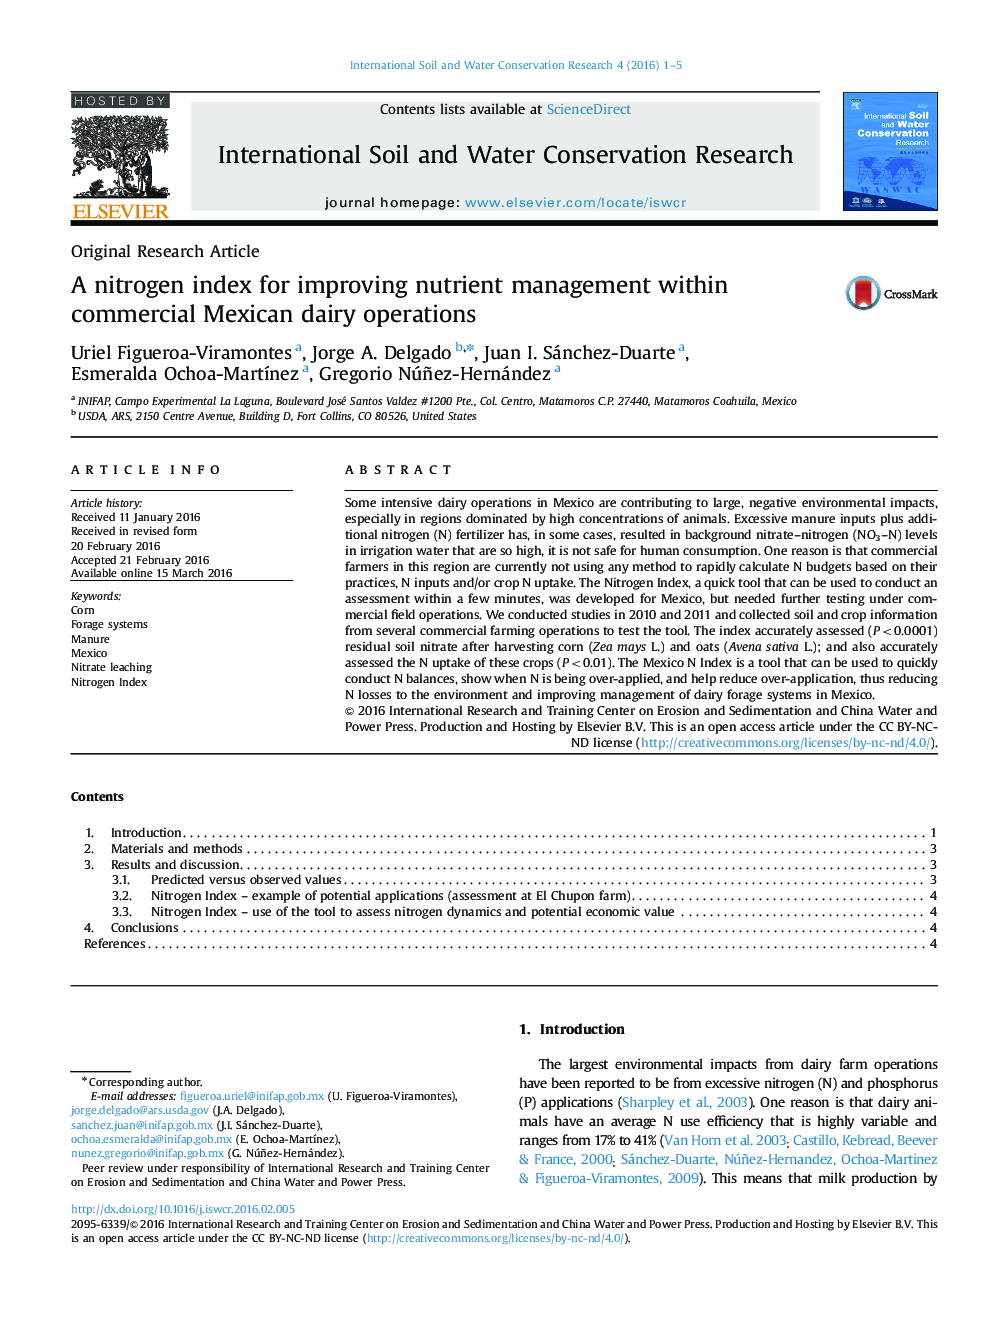 A nitrogen index for improving nutrient management within commercial Mexican dairy operations 